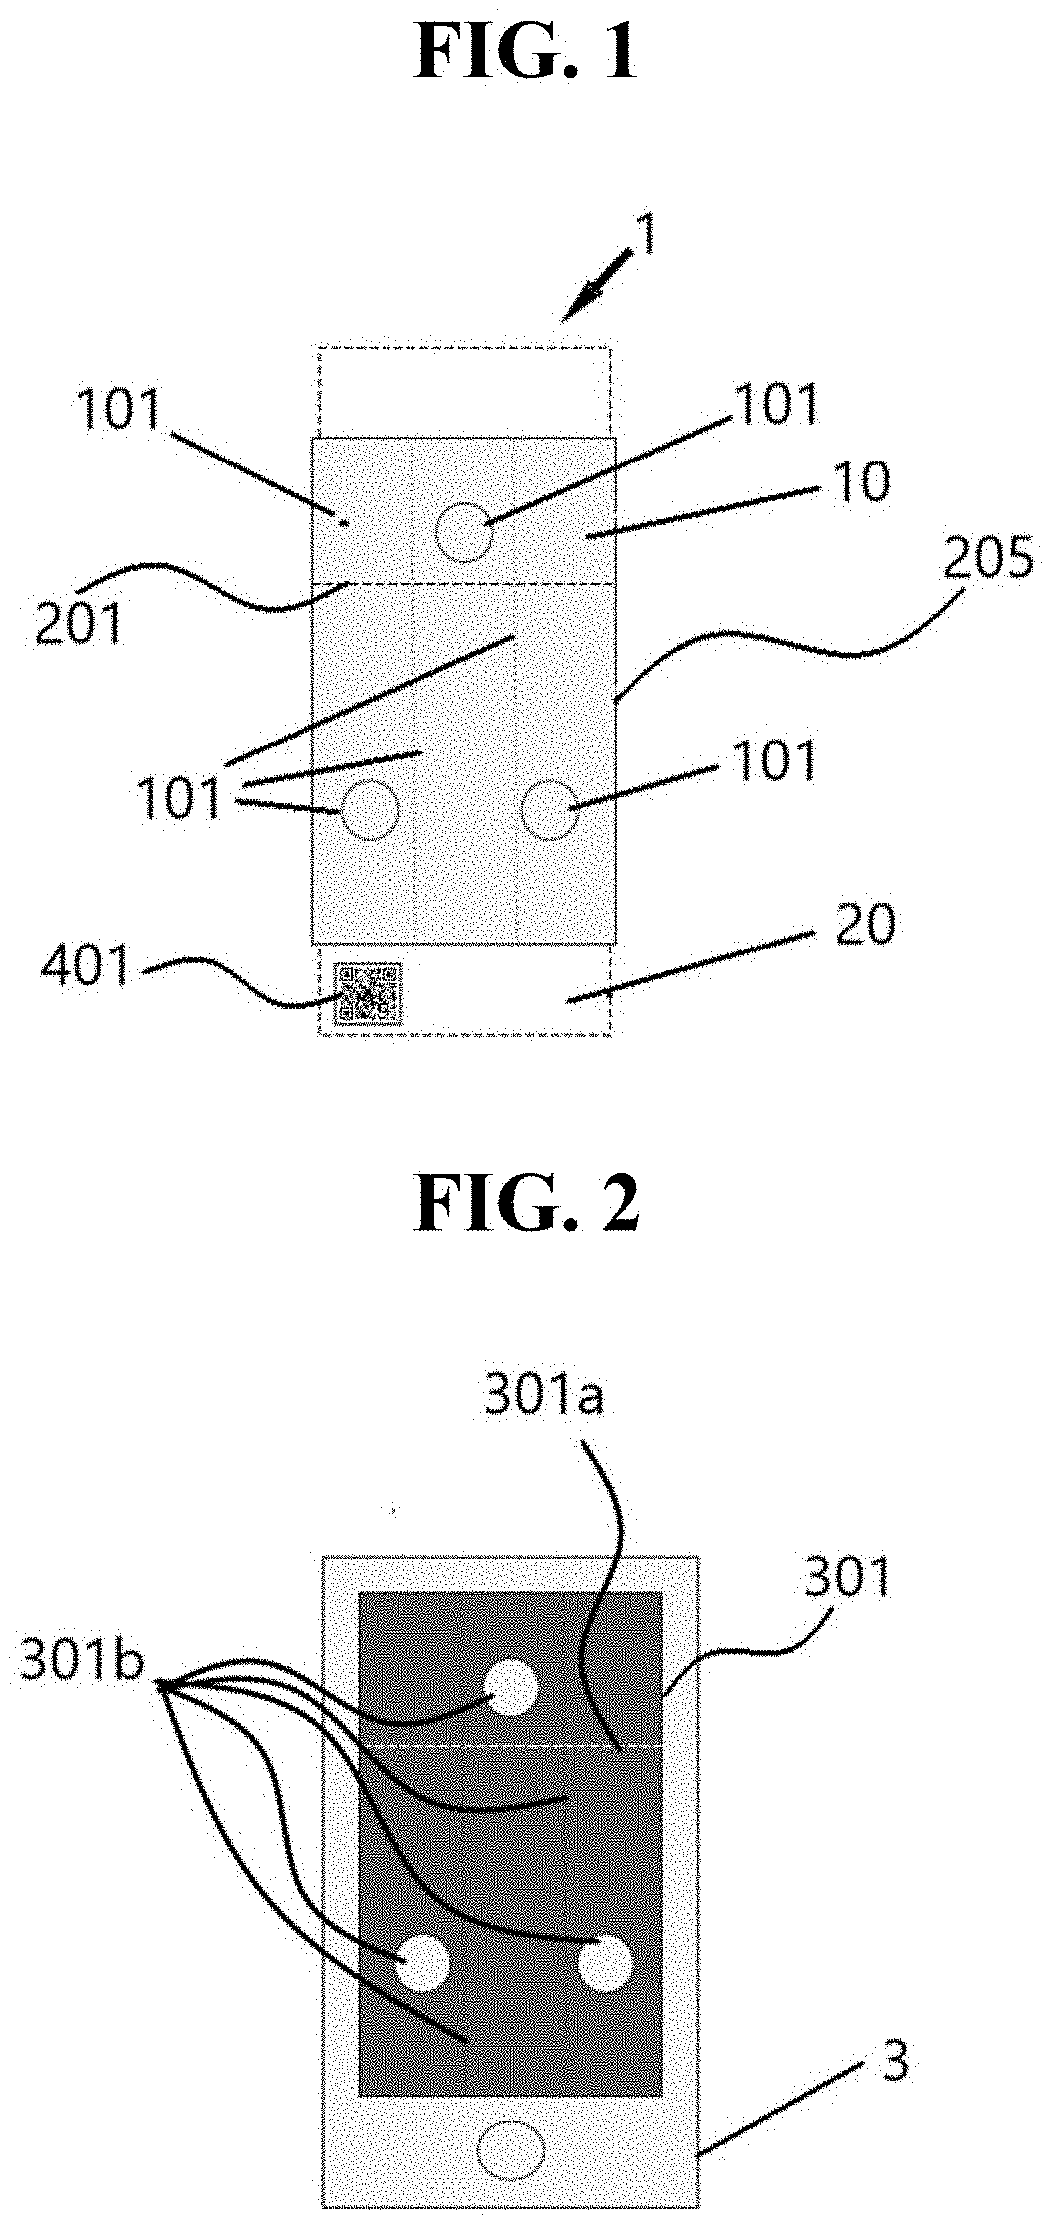 Method for manufacturing and attaching a screen protector for smart devices